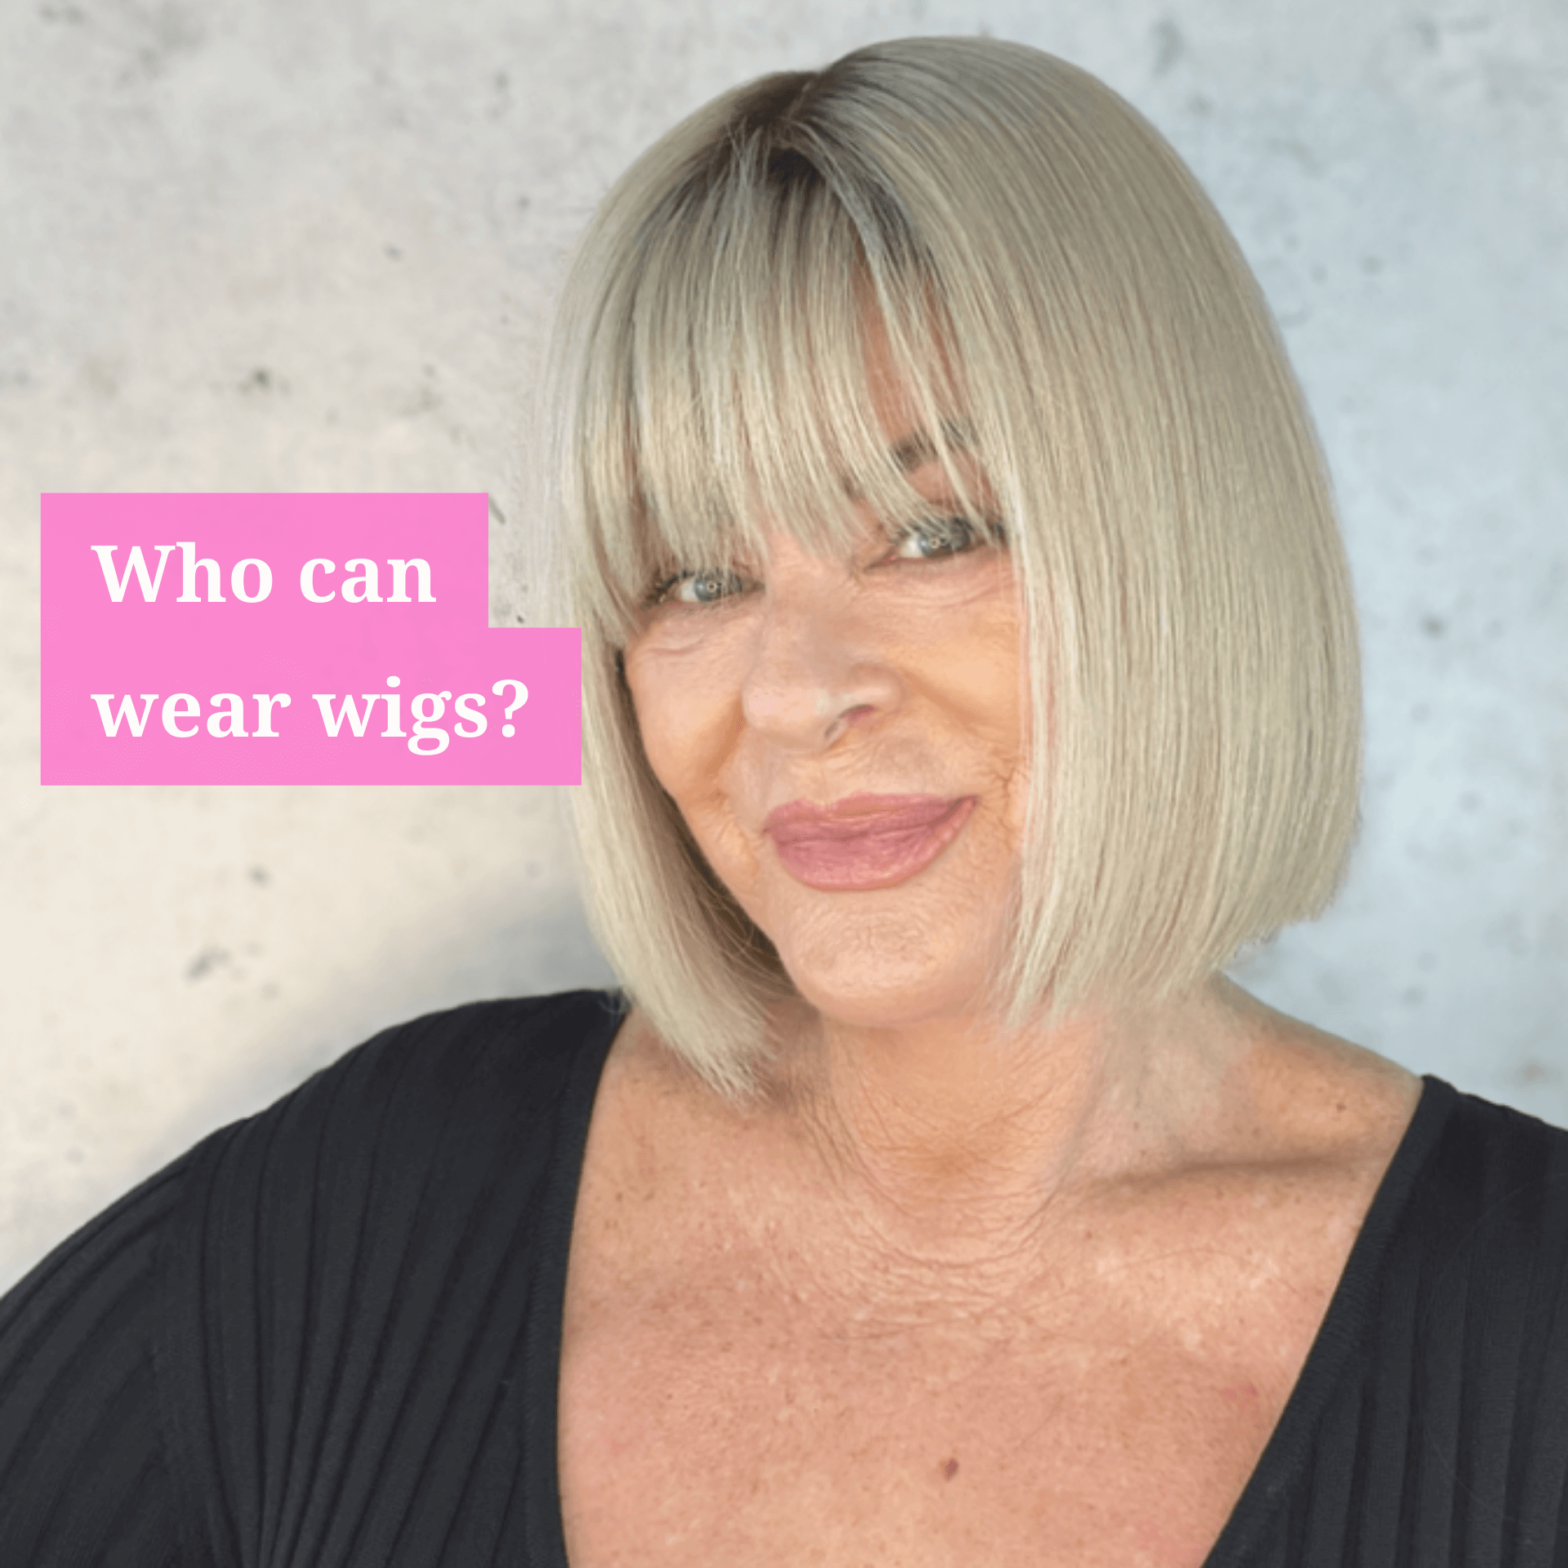 Lace Fronts Australia - who can wear wigs